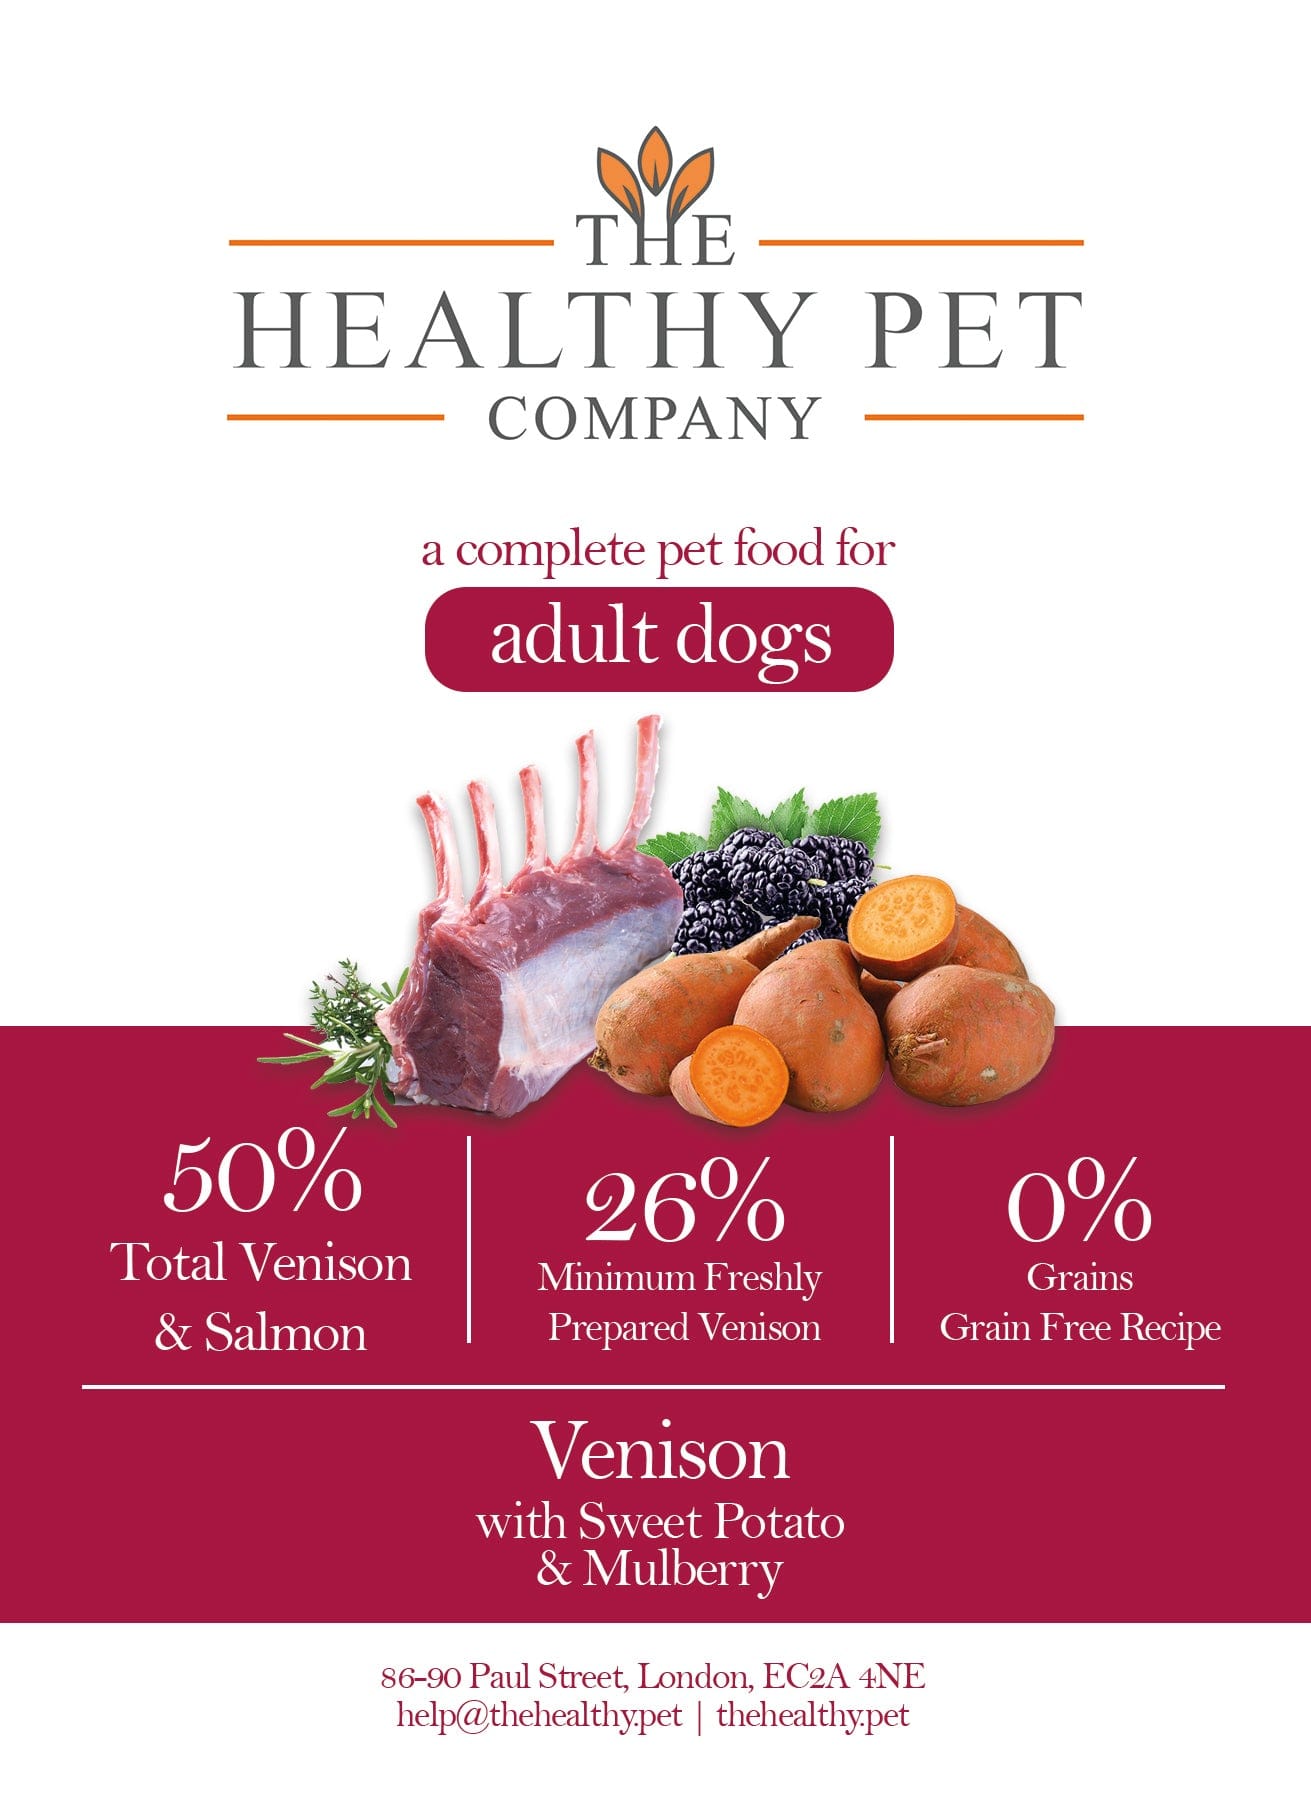 The Healthy Pet Company Complete Meal - Venison & Salmon for Adult Dogs - The Healthy Pet Company